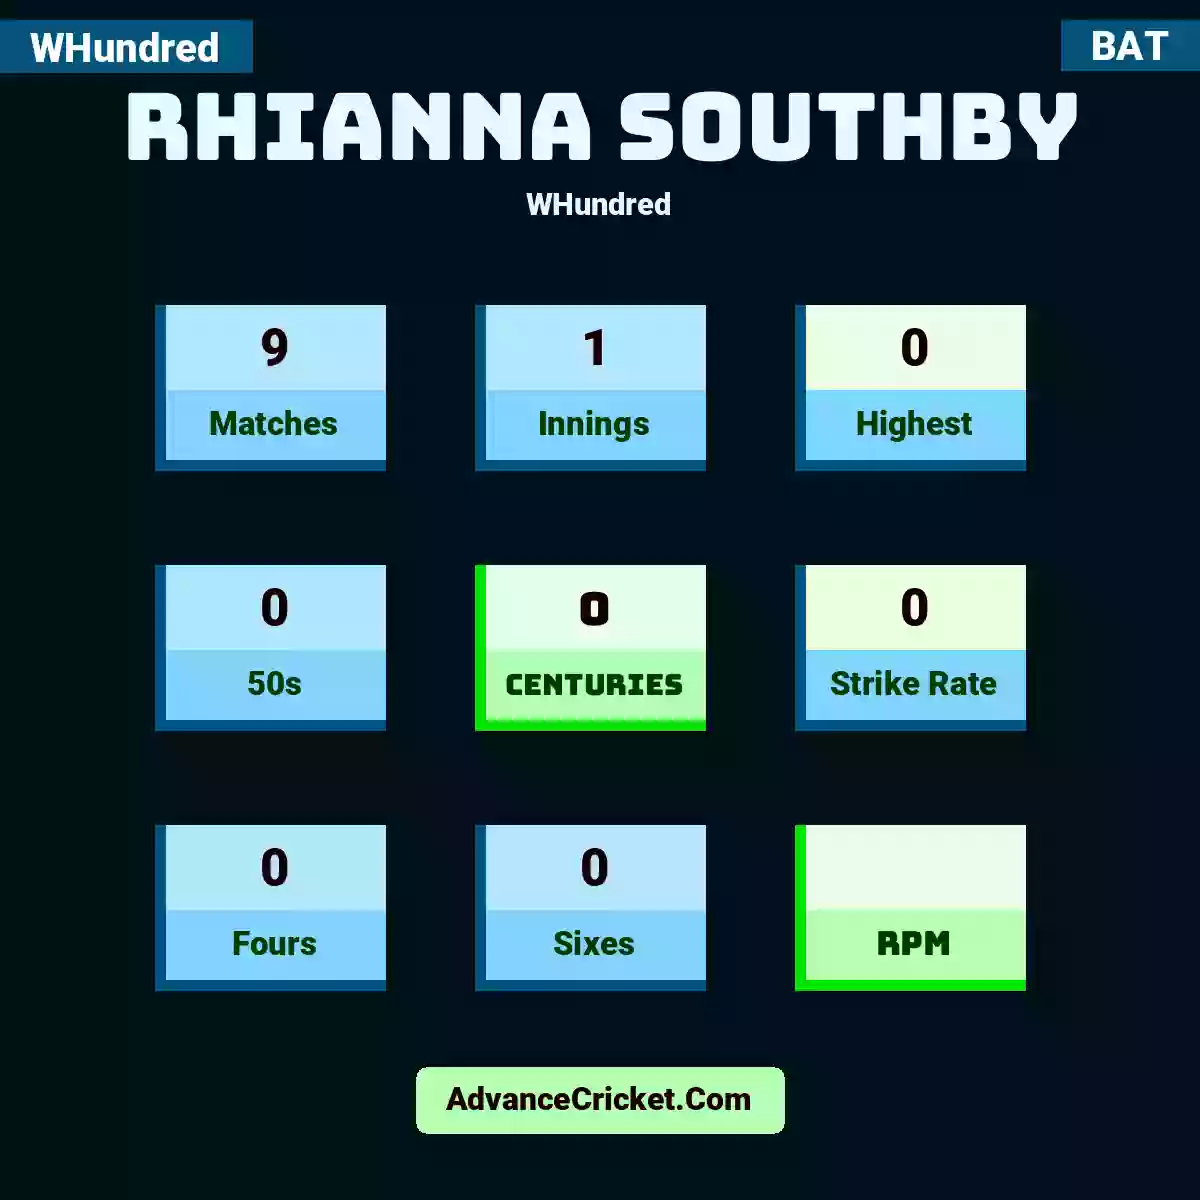 Rhianna Southby WHundred , Rhianna Southby played 9 matches, scored 0 runs as highest, 0 half-centuries, and 0 centuries, with a strike rate of 0. R.Southby hit 0 fours and 0 sixes.